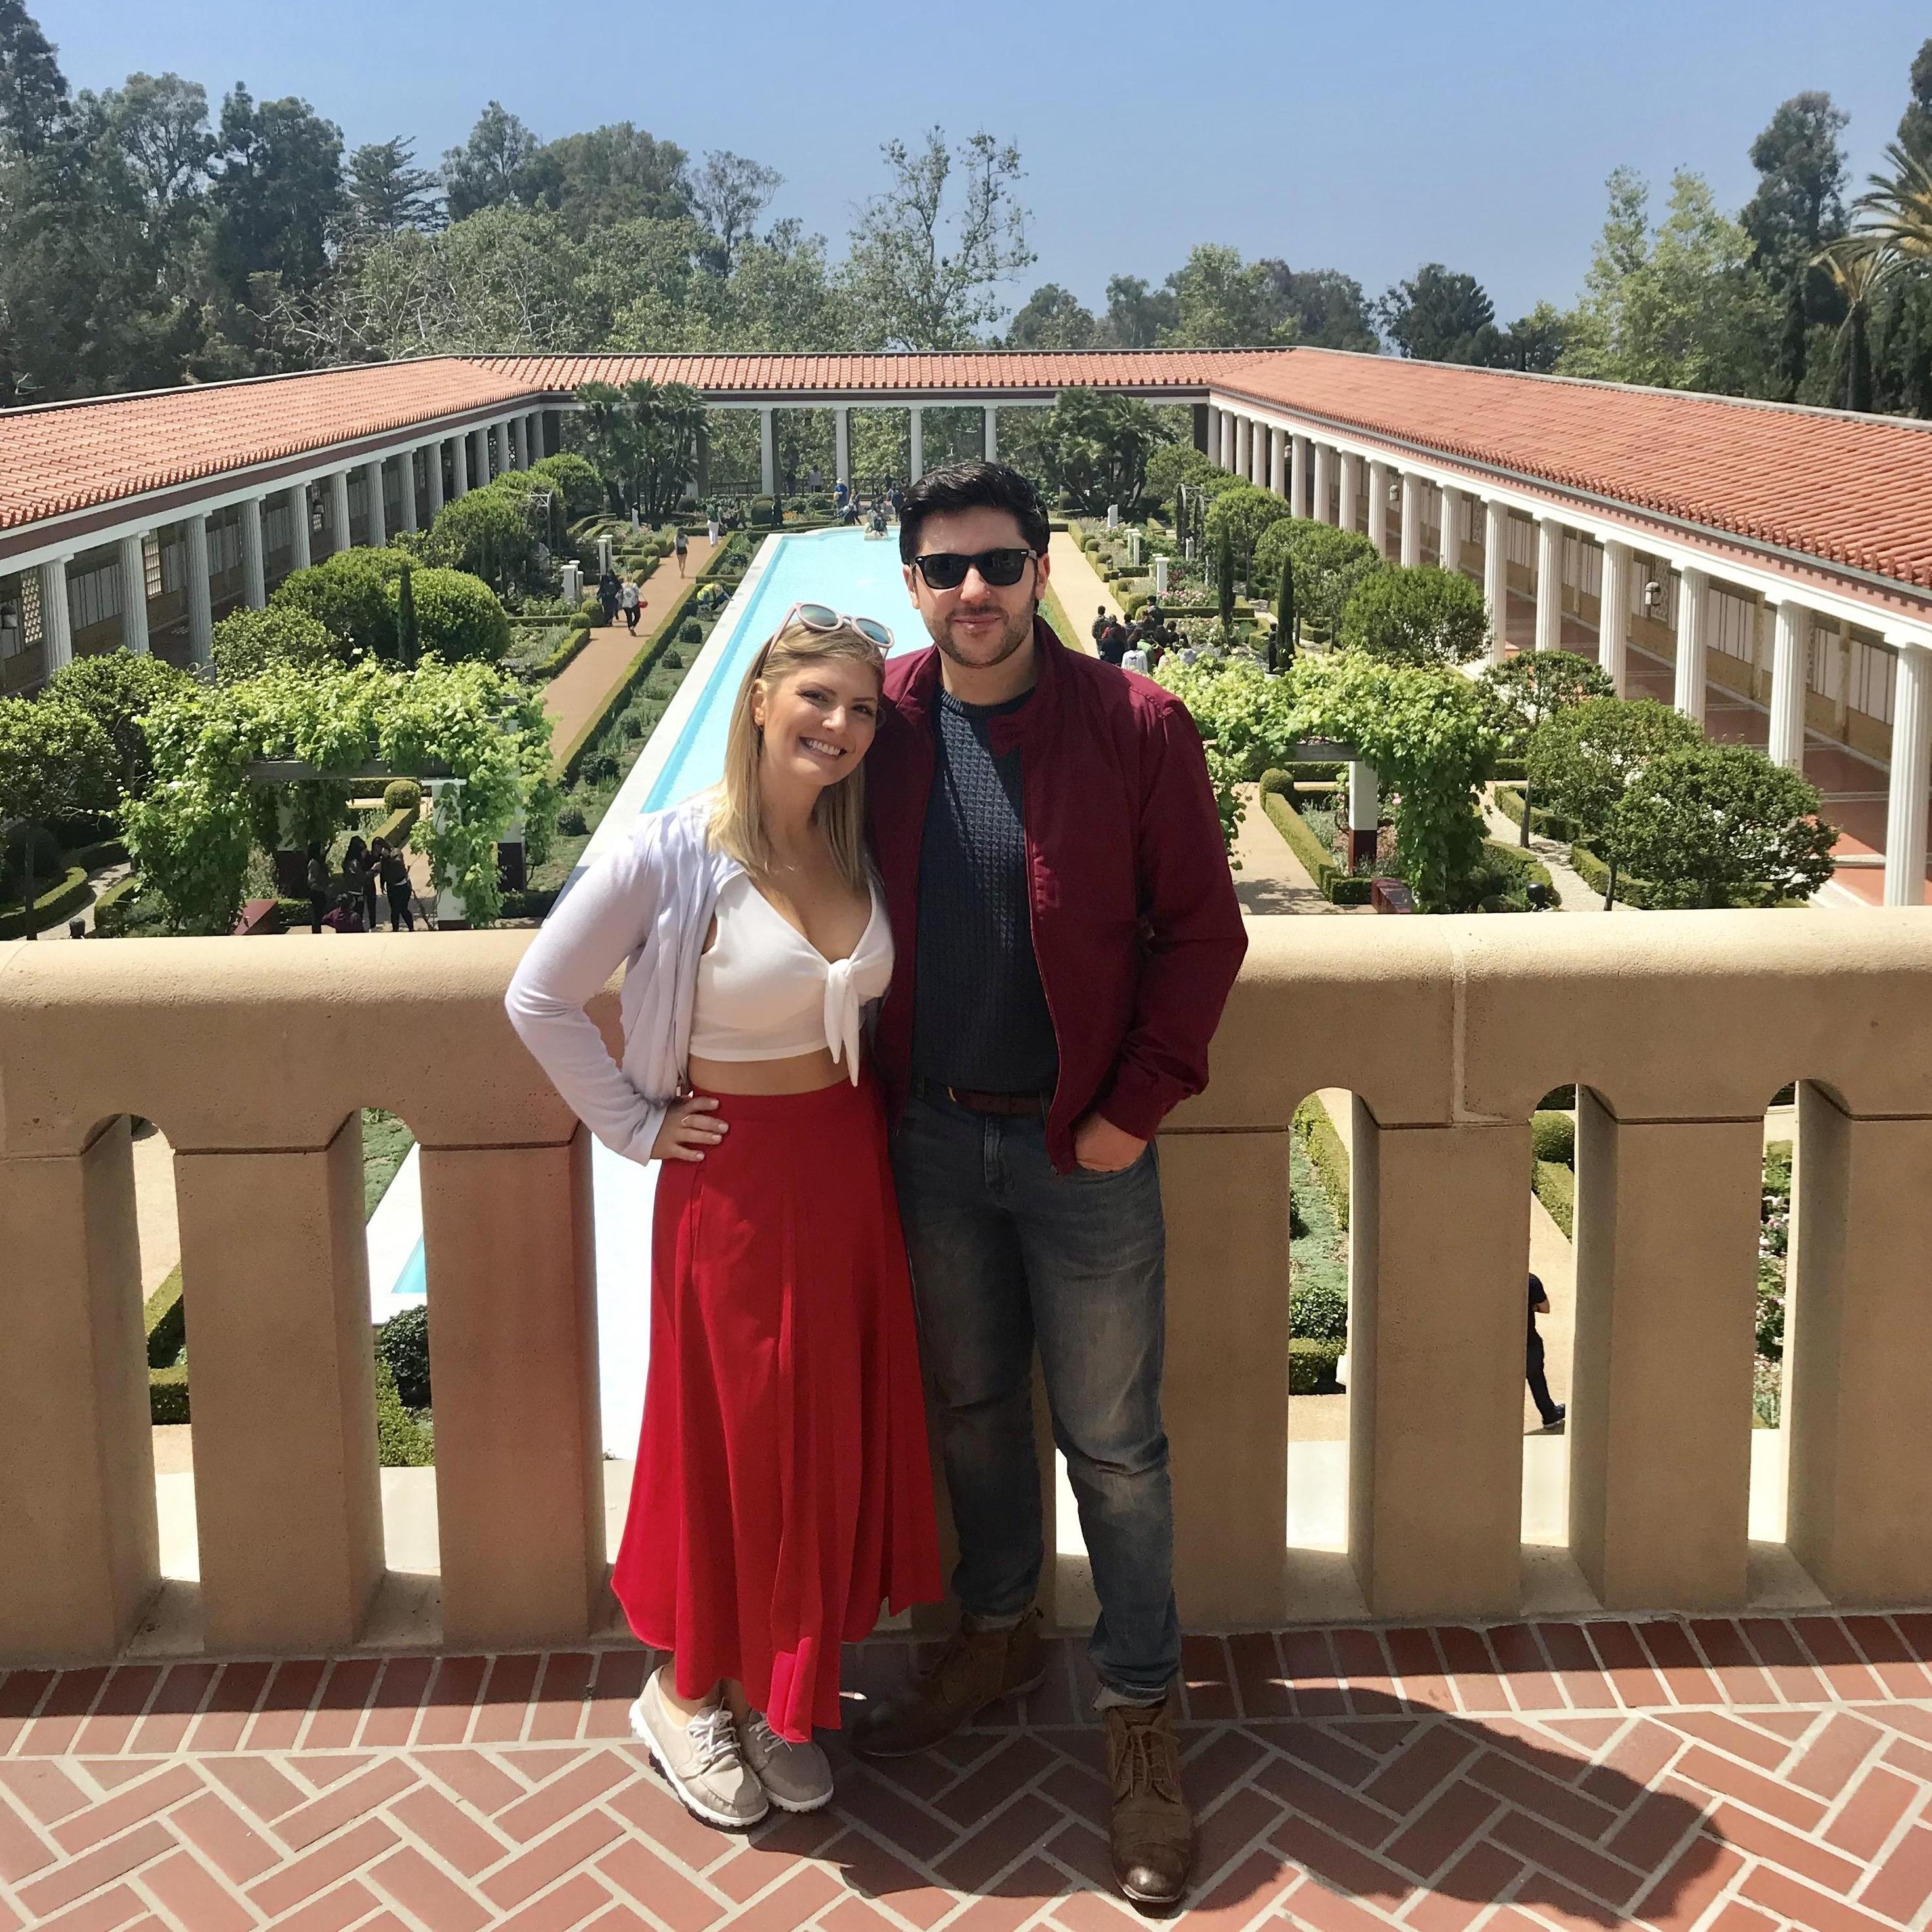 Exploring the grounds of the Getty Villa in LA
2019